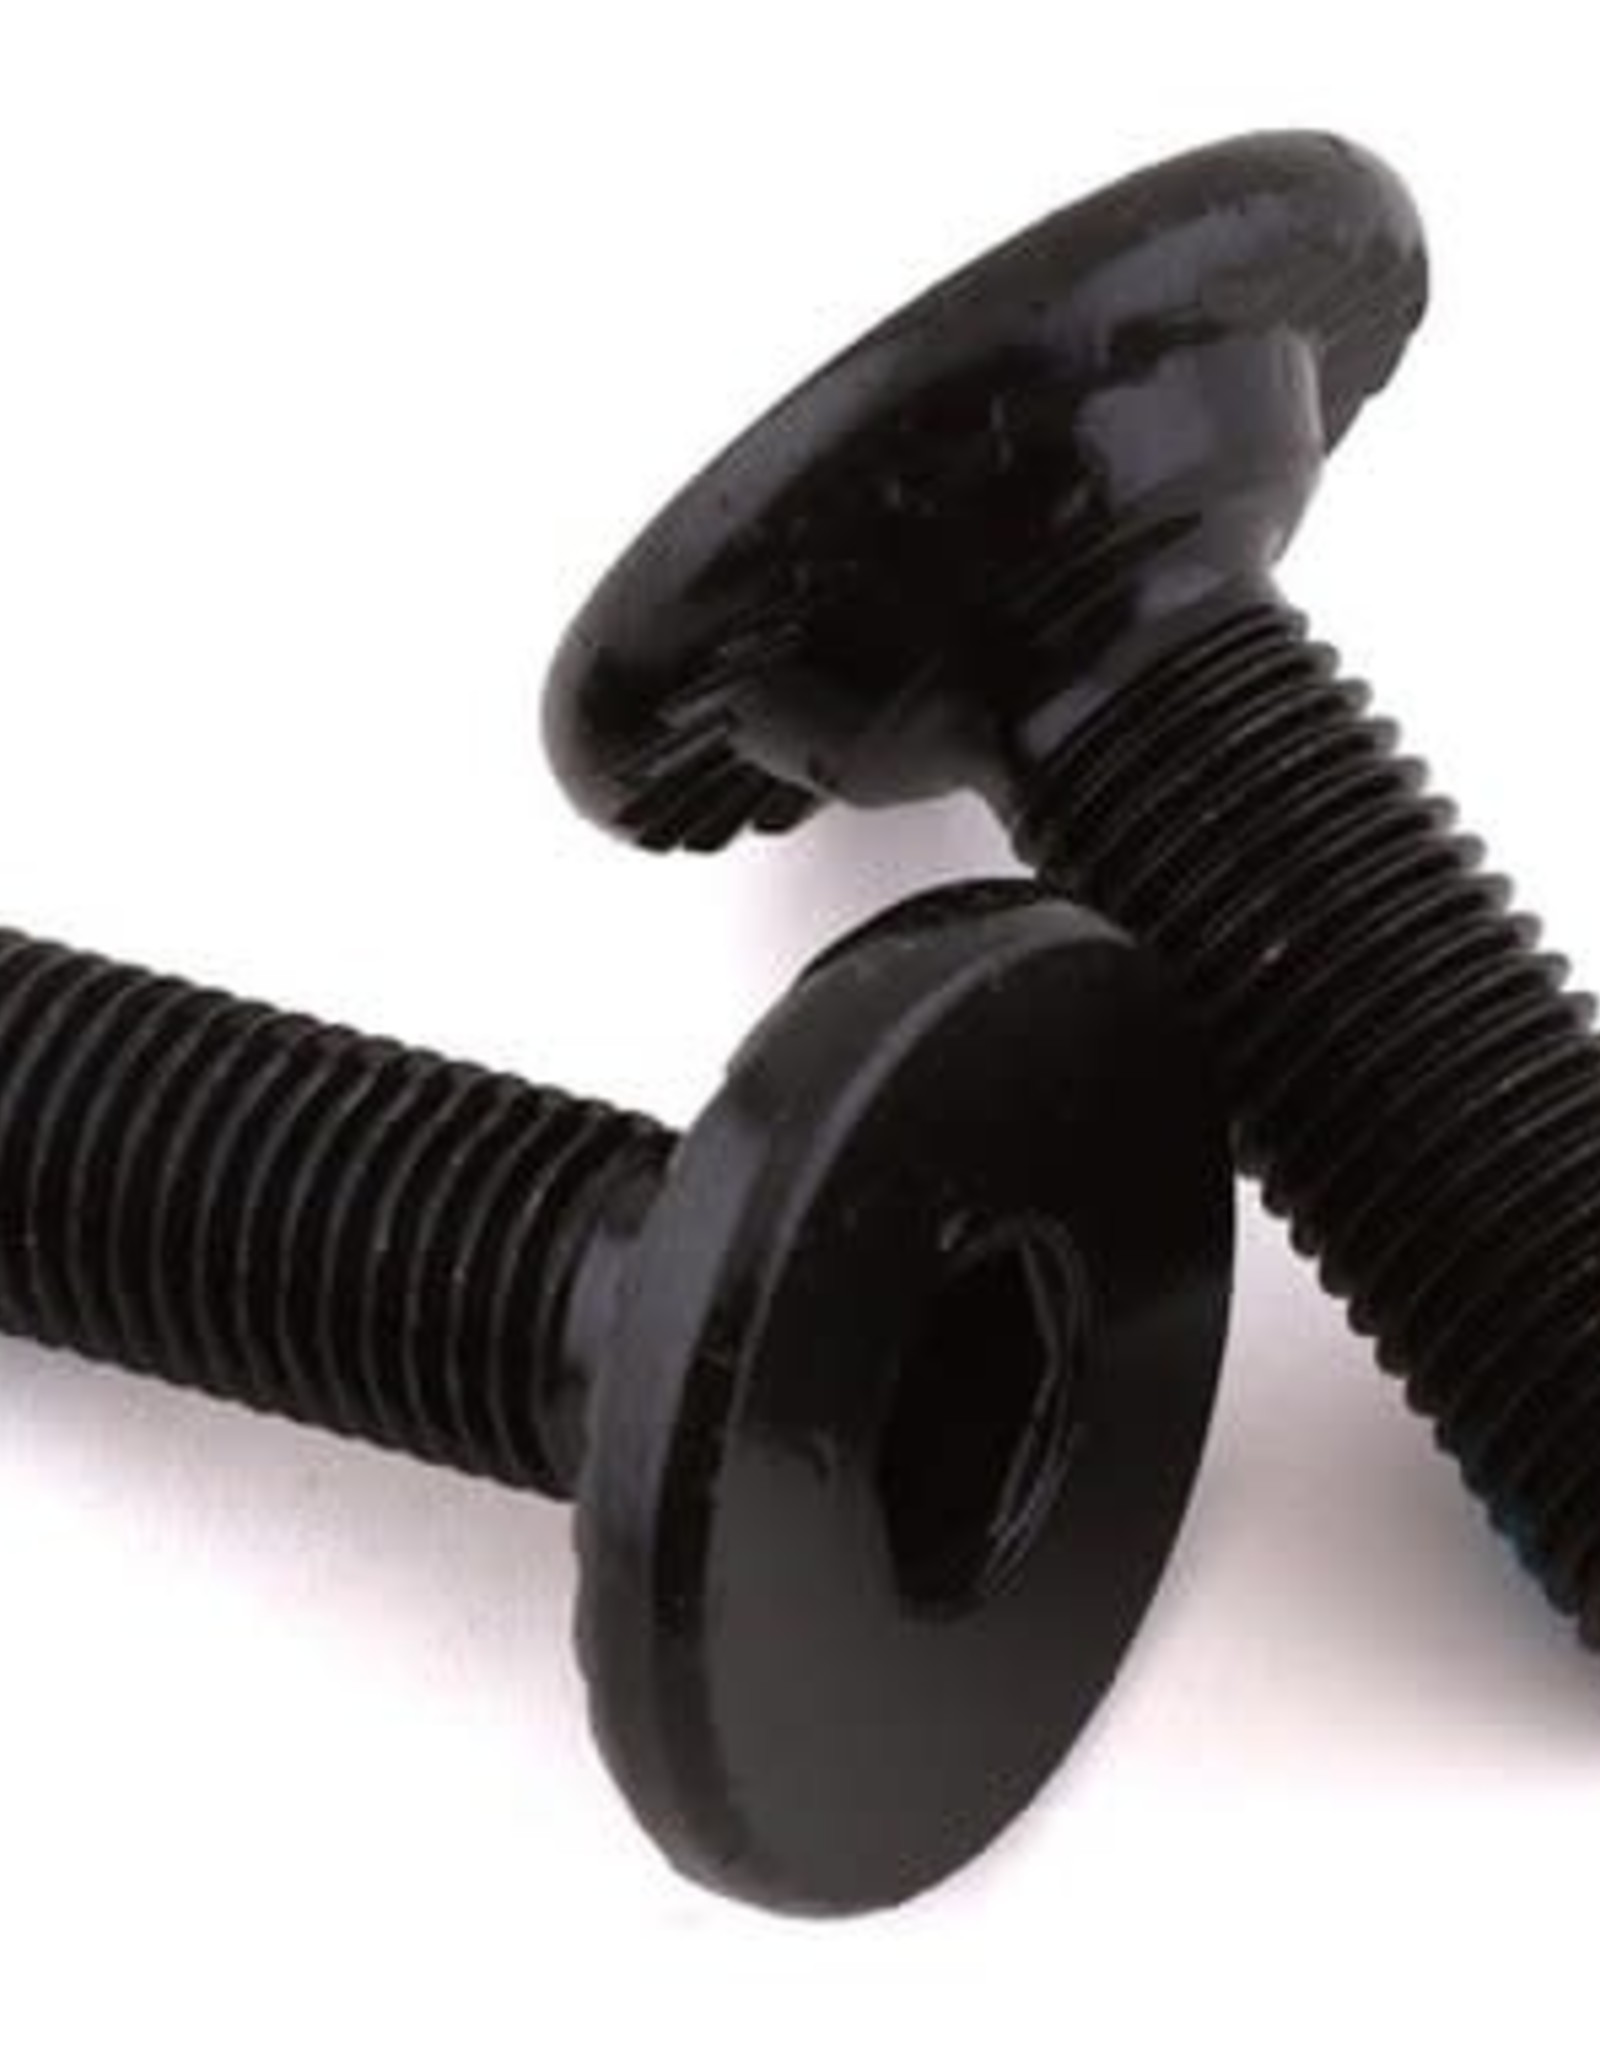 Mission Replacement Spindle Bolt Black